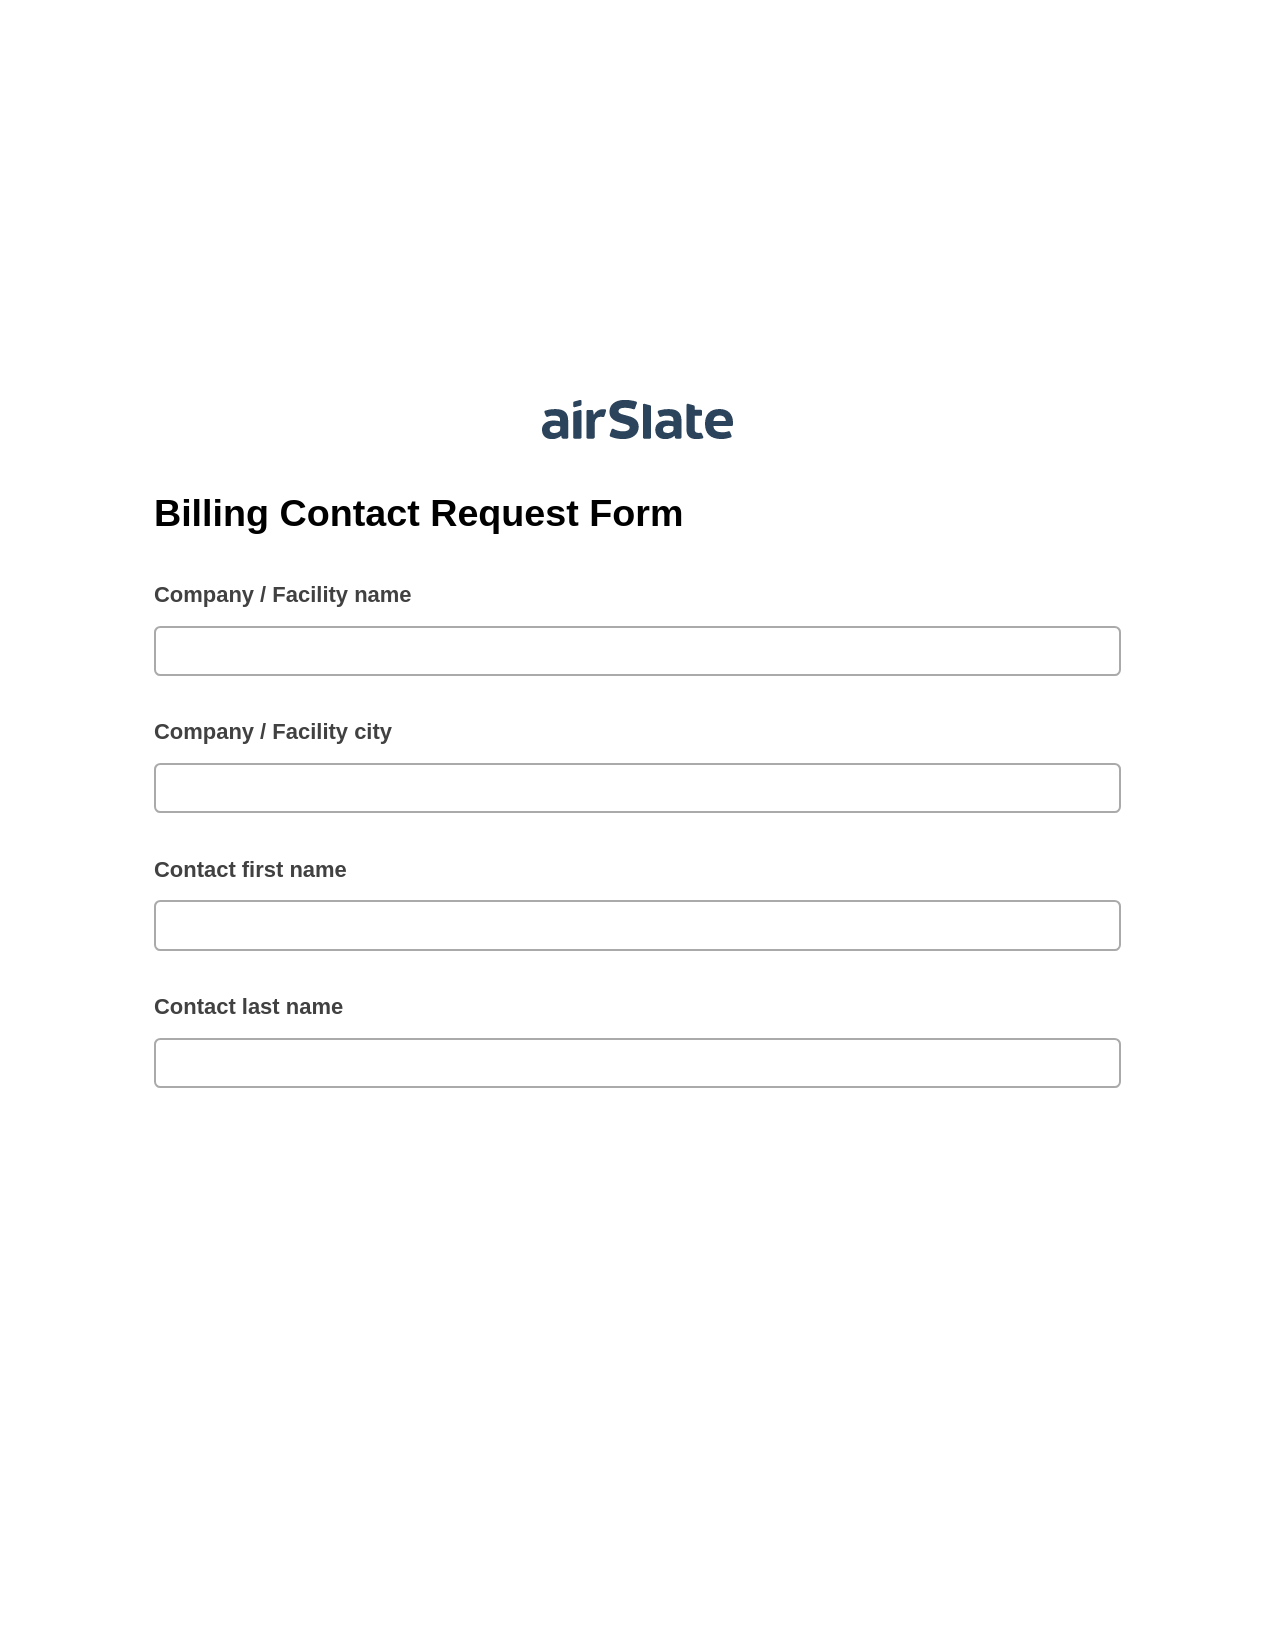 Multirole Billing Contact Request Form Pre-fill Document Bot, Remove Slate Bot, Export to MySQL Bot